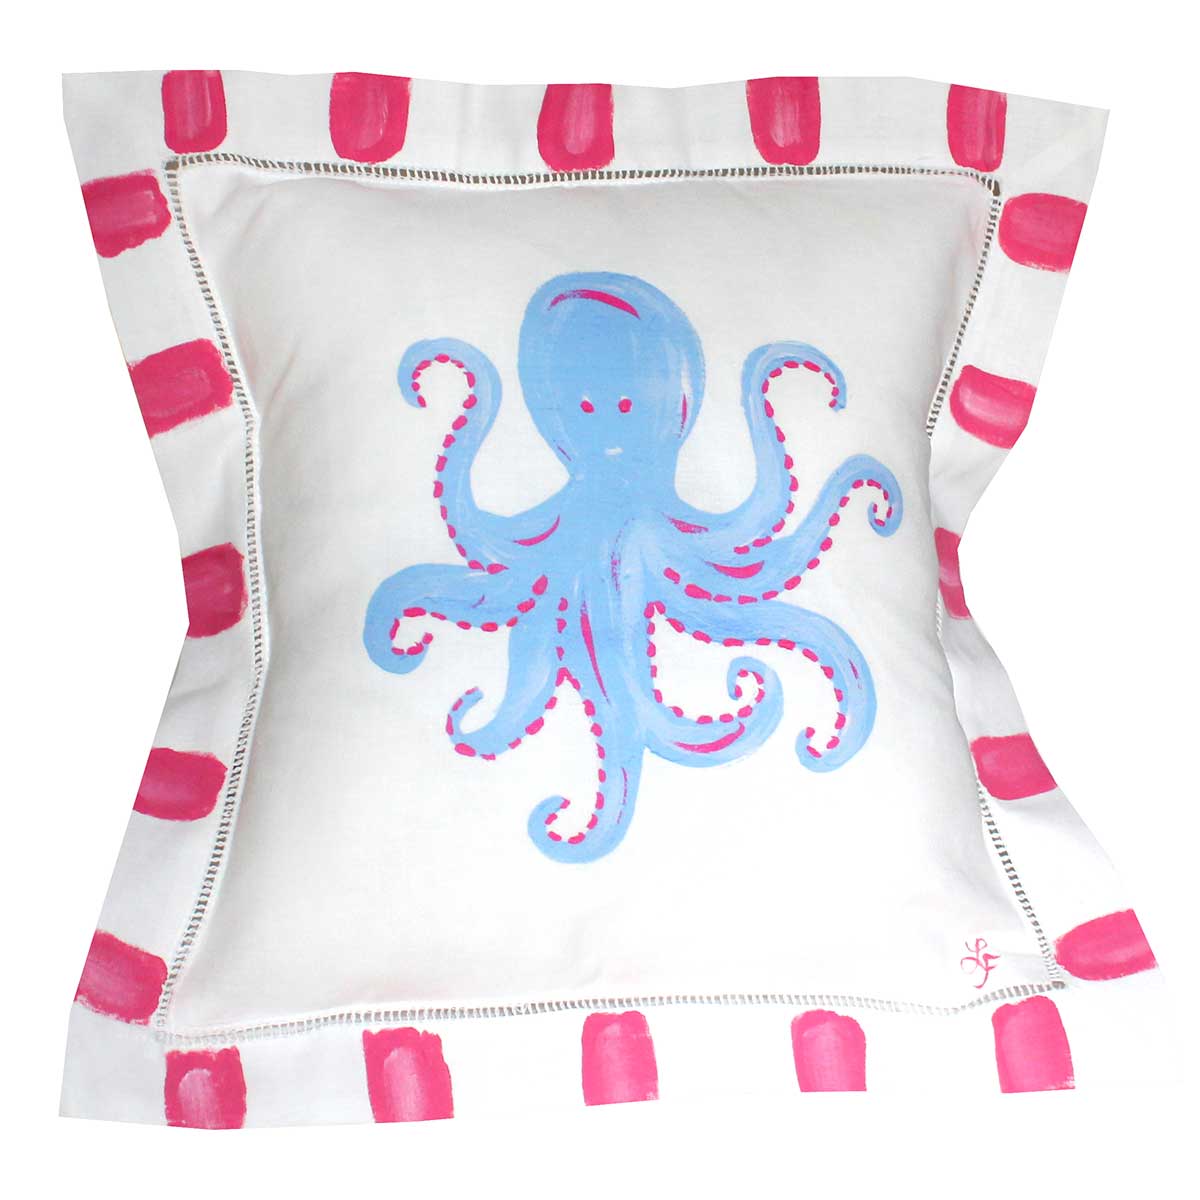 Periwinkle and Pink Octopus Linen Pillow